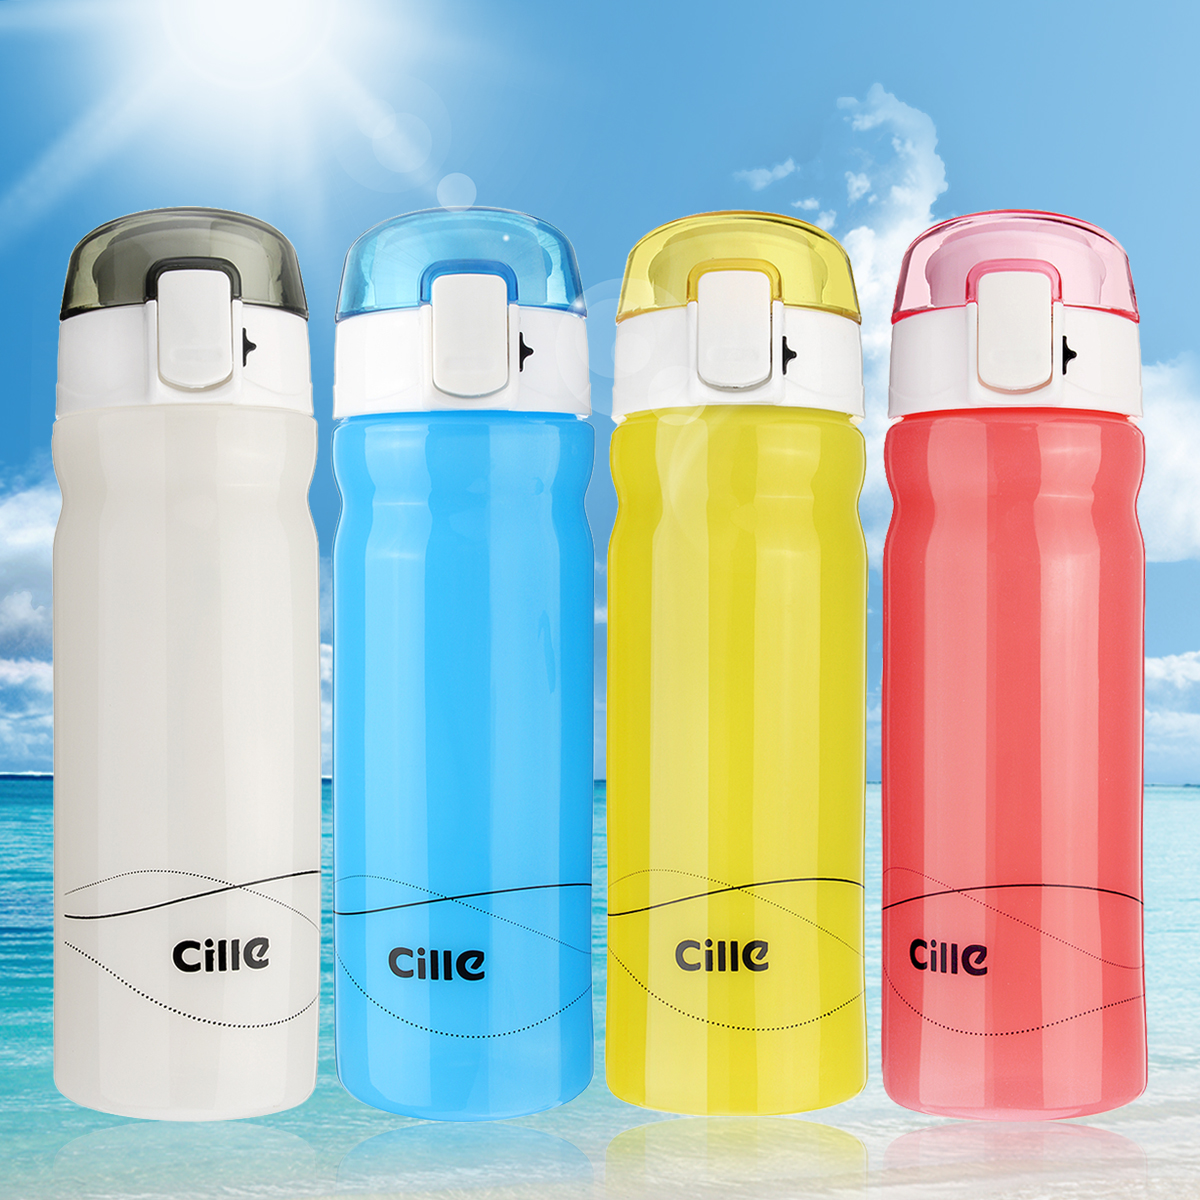 600ml20oz-High-quality-Food-Grade-Water-Bottle-for-long-hikes-trekking-hot-yoga-class-long-load-trip-1523049-3